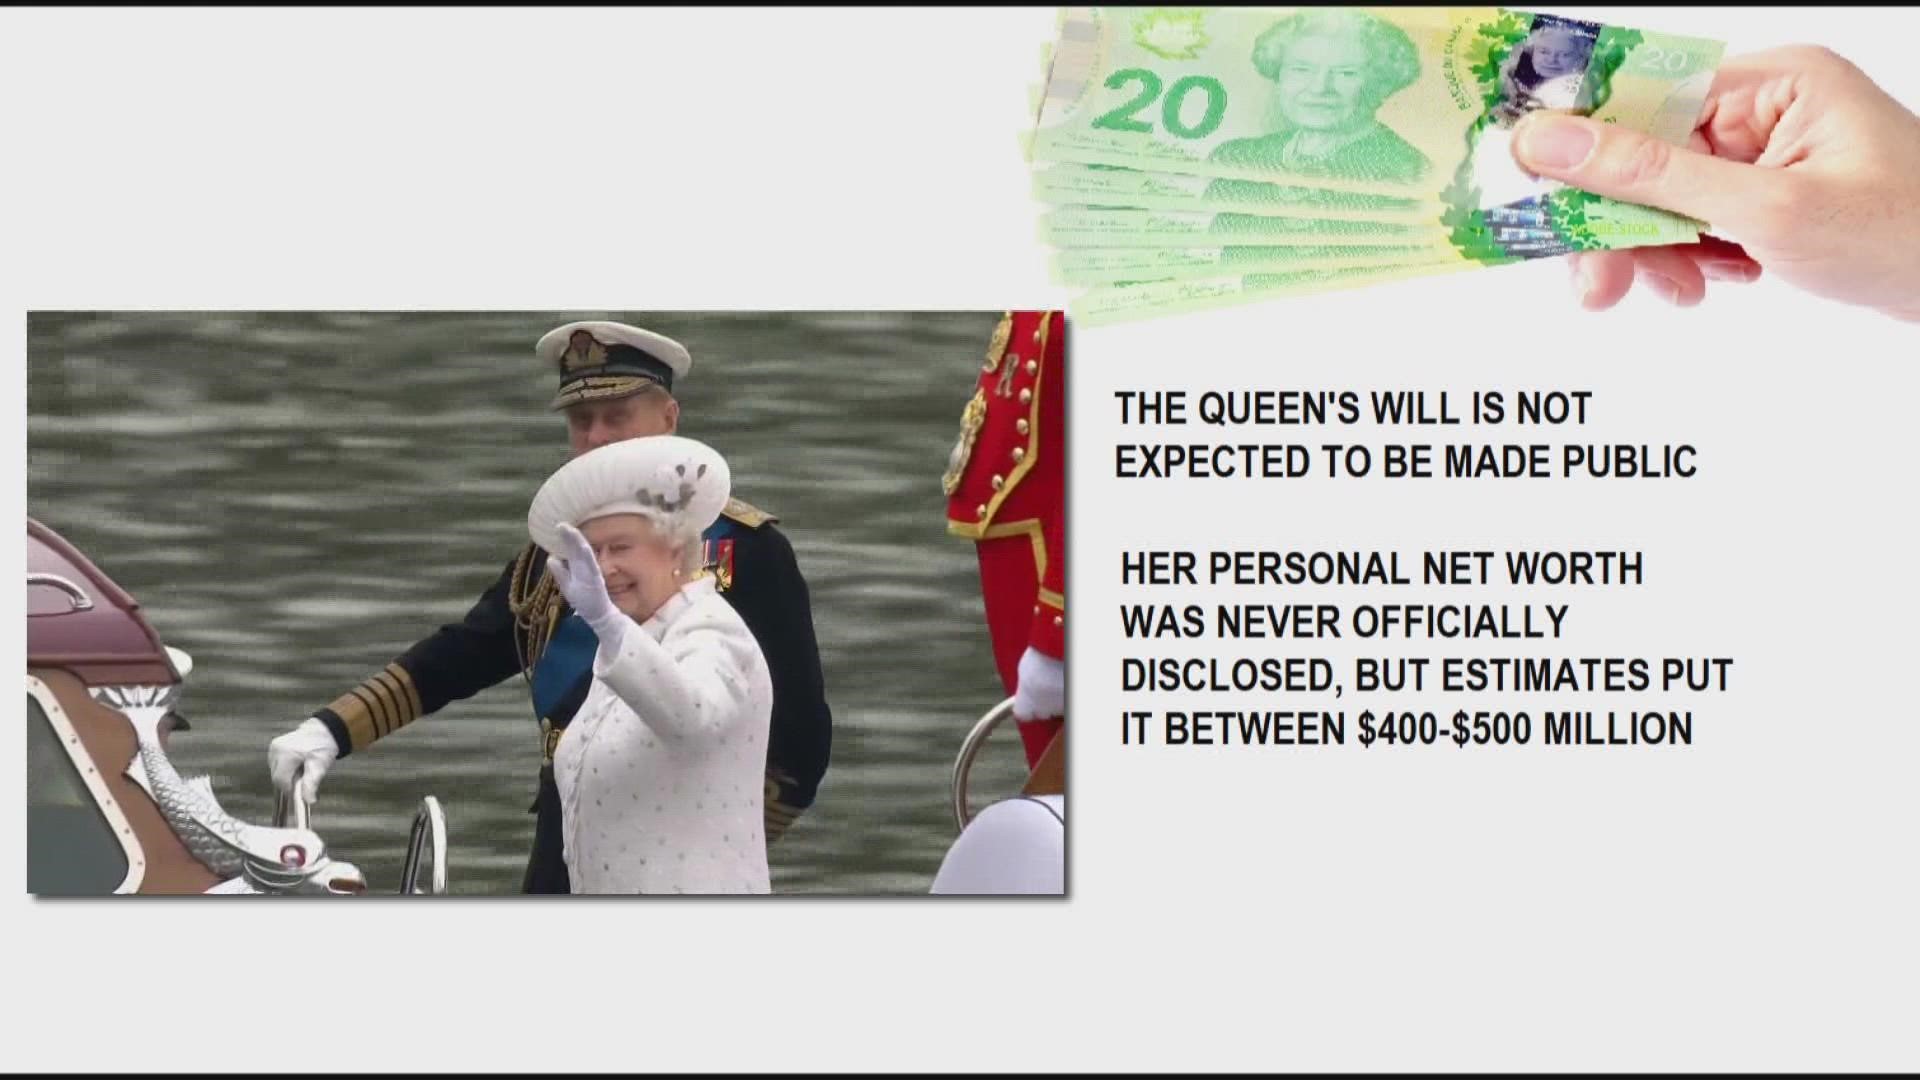 Queen Elizabeth's personal wealth is estimated to be between $400 and $500 million dollars.